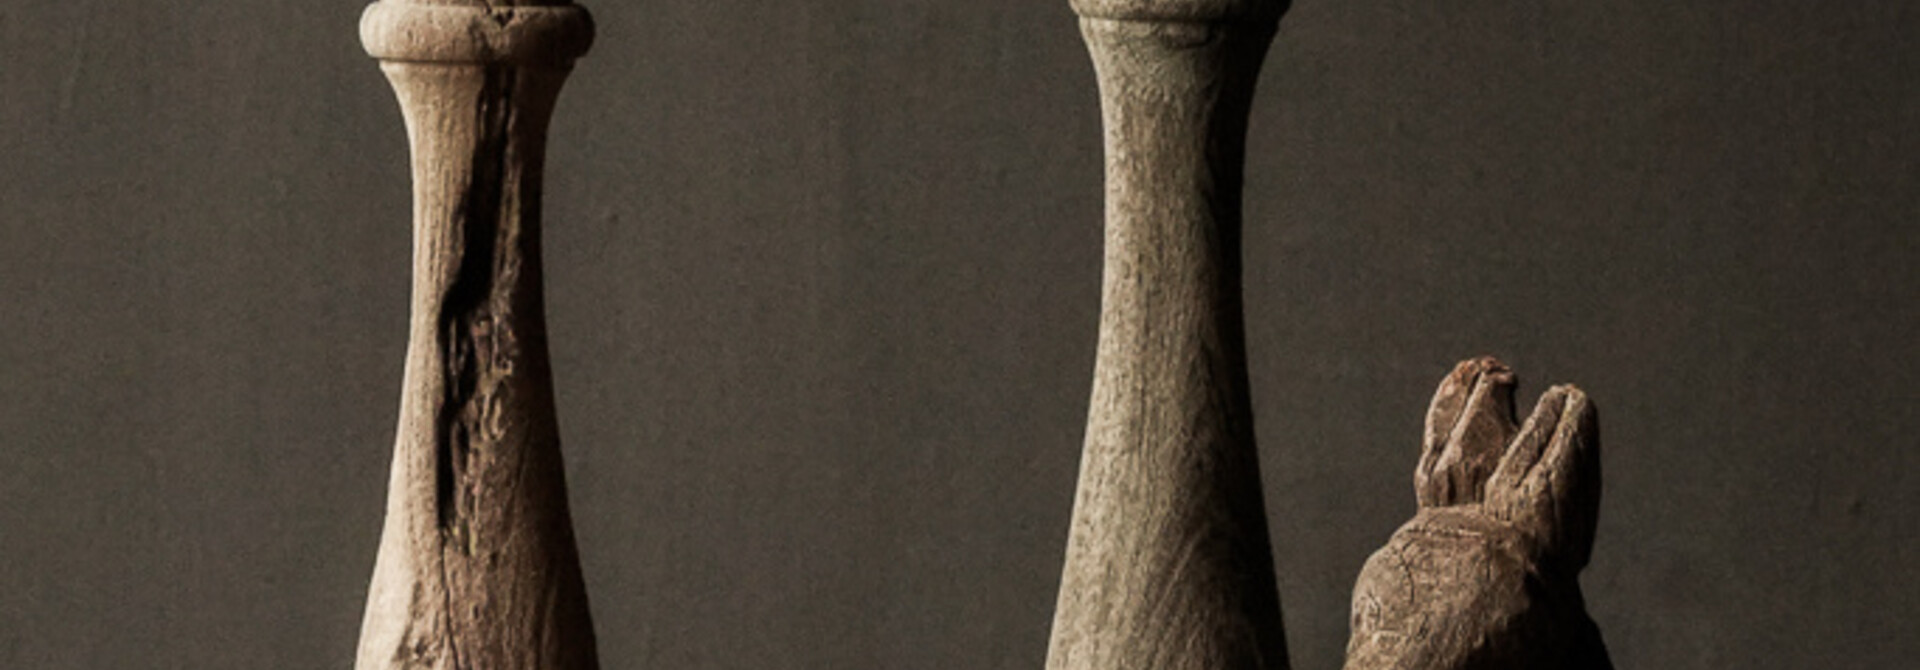 Tough old weathered rustic wooden candlestick